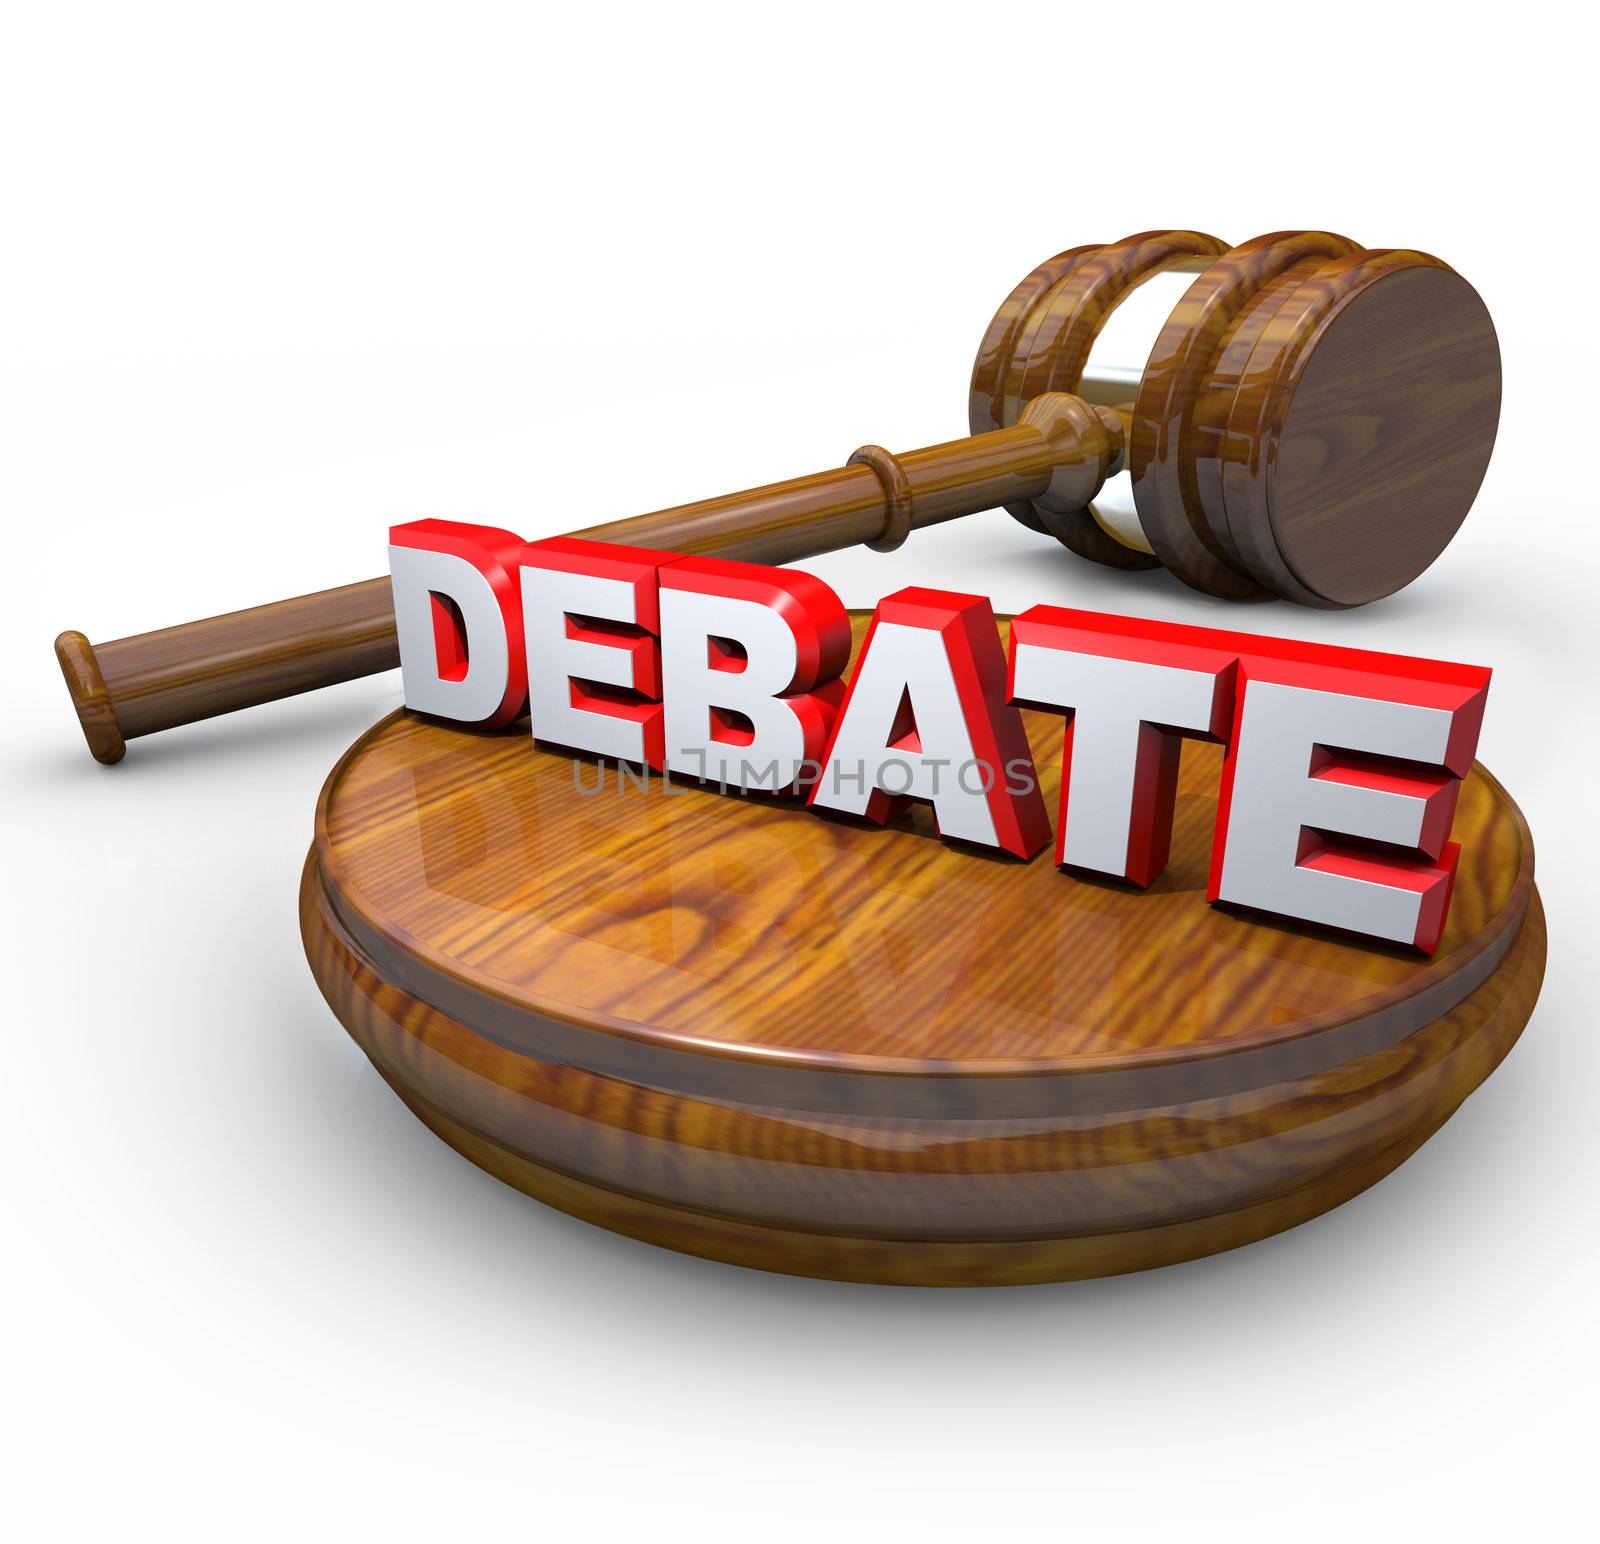 A judge's gavel and the word Debate, symbolizing the hearing of an argument between two opposing sides